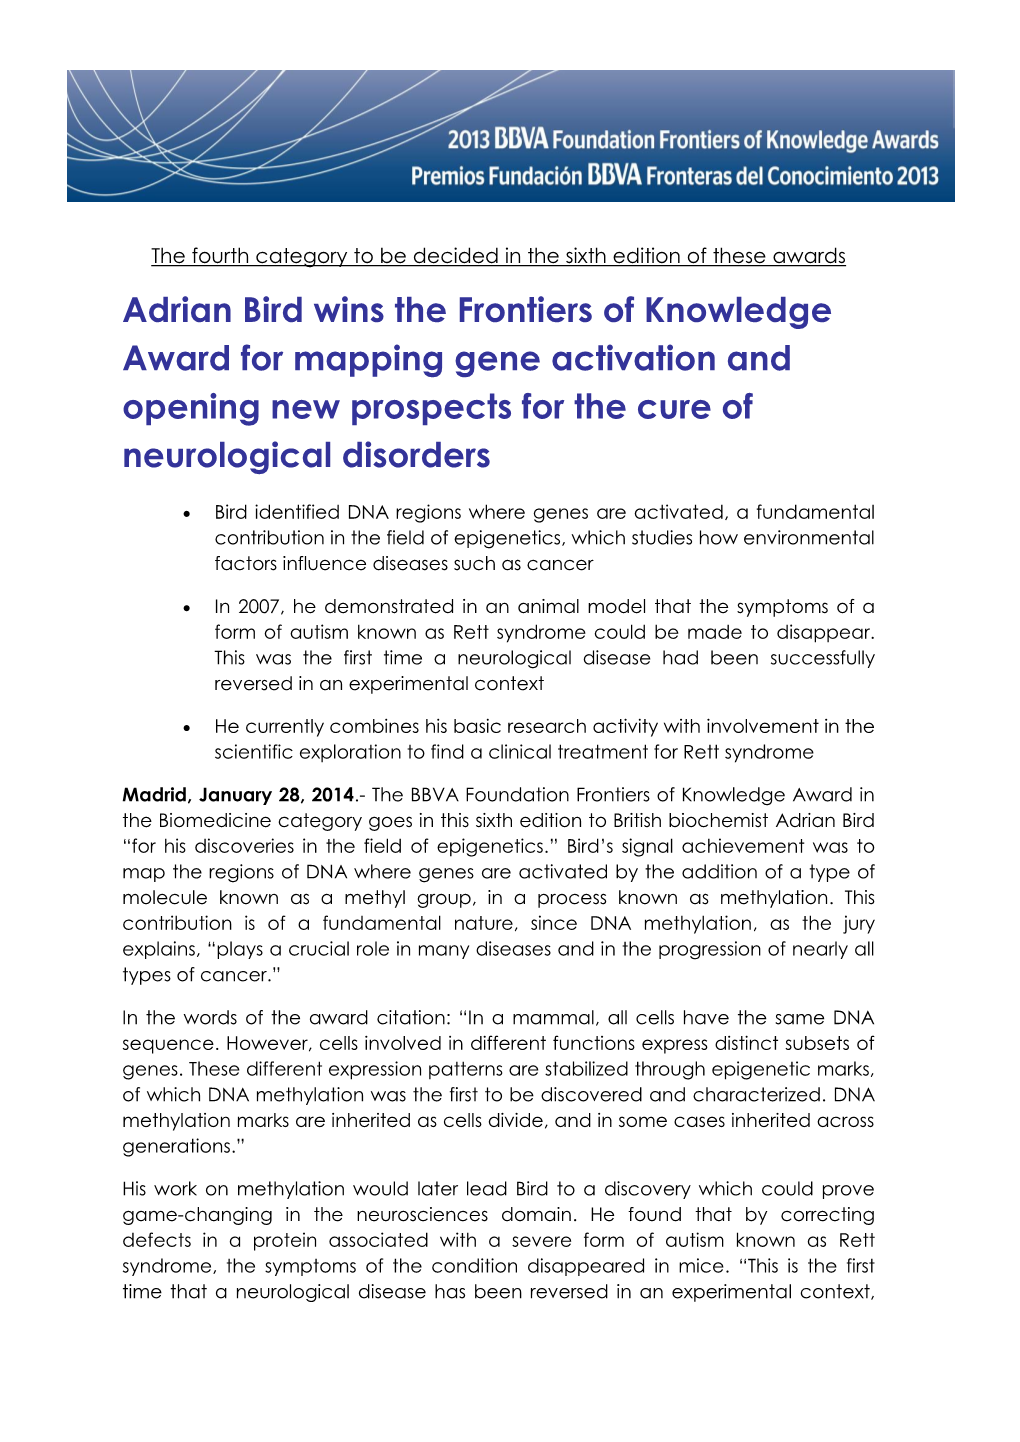 Adrian Bird Wins the Frontiers of Knowledge Award for Mapping Gene Activation and Opening New Prospects for the Cure of Neurological Disorders